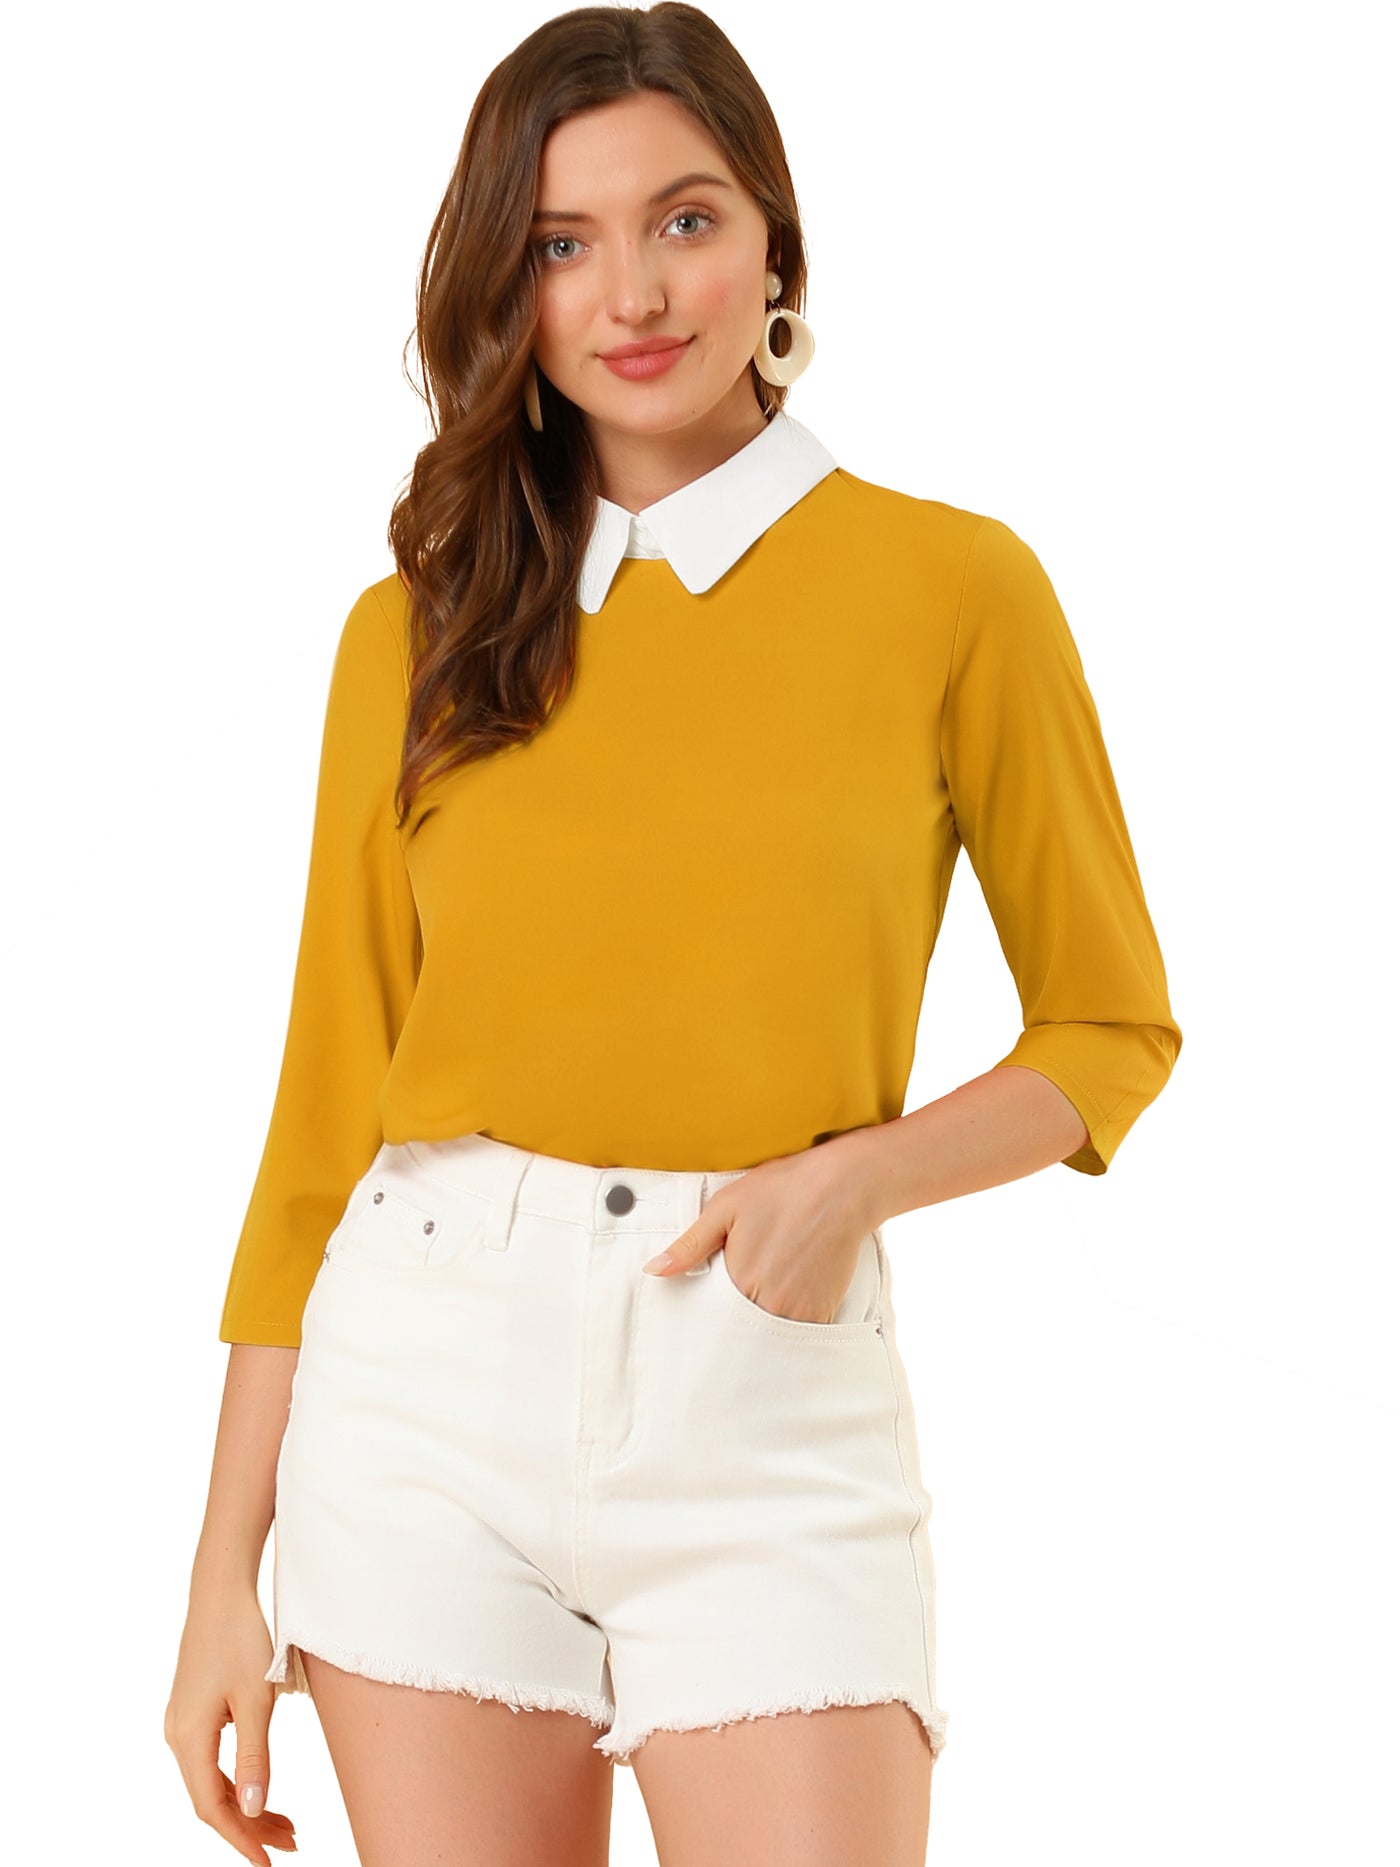 Allegra K Contrast Point Collar 3/4 Sleeve Casual Chiffon Blouse Tops